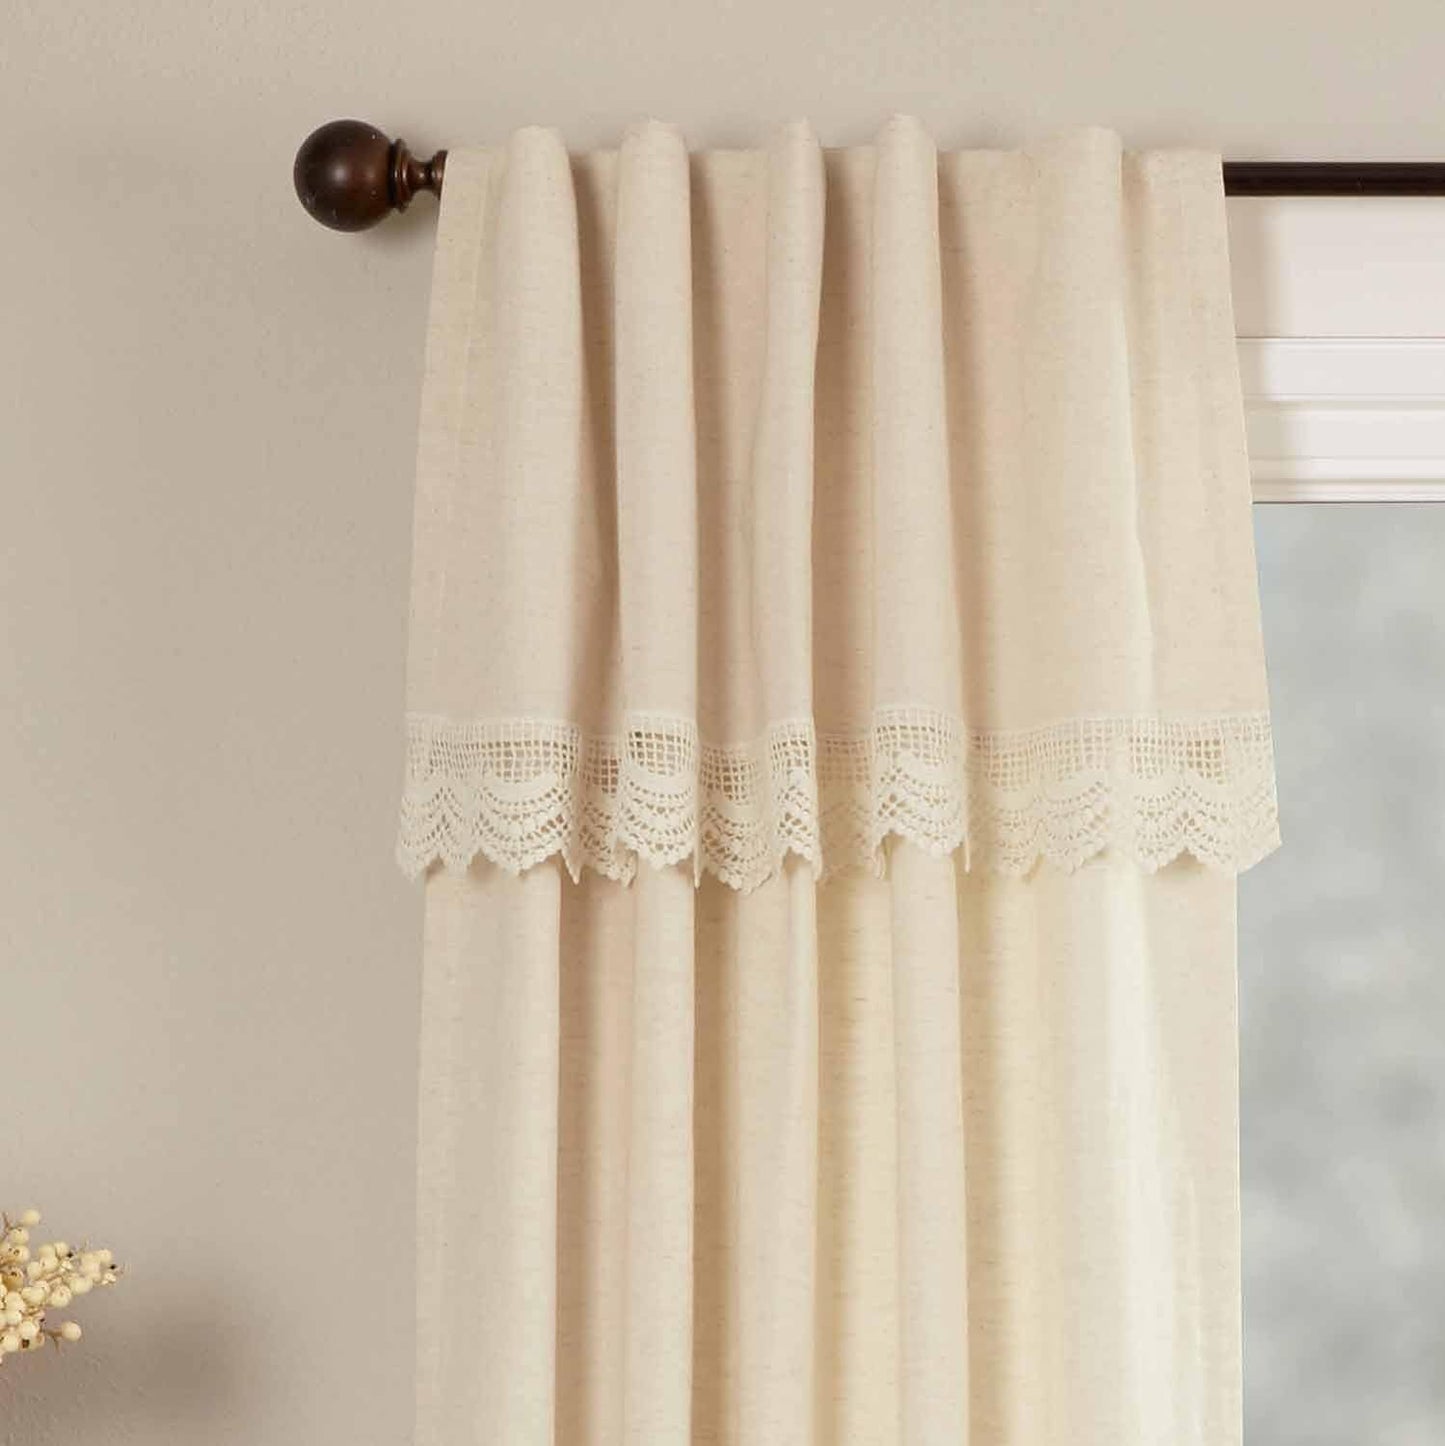 Piper Classics Flax and Lace Valance Curtain, 72" Wide, Natural Cream Window Topper W/Crochet Lace Trim, Vintage Farmhouse, Boho